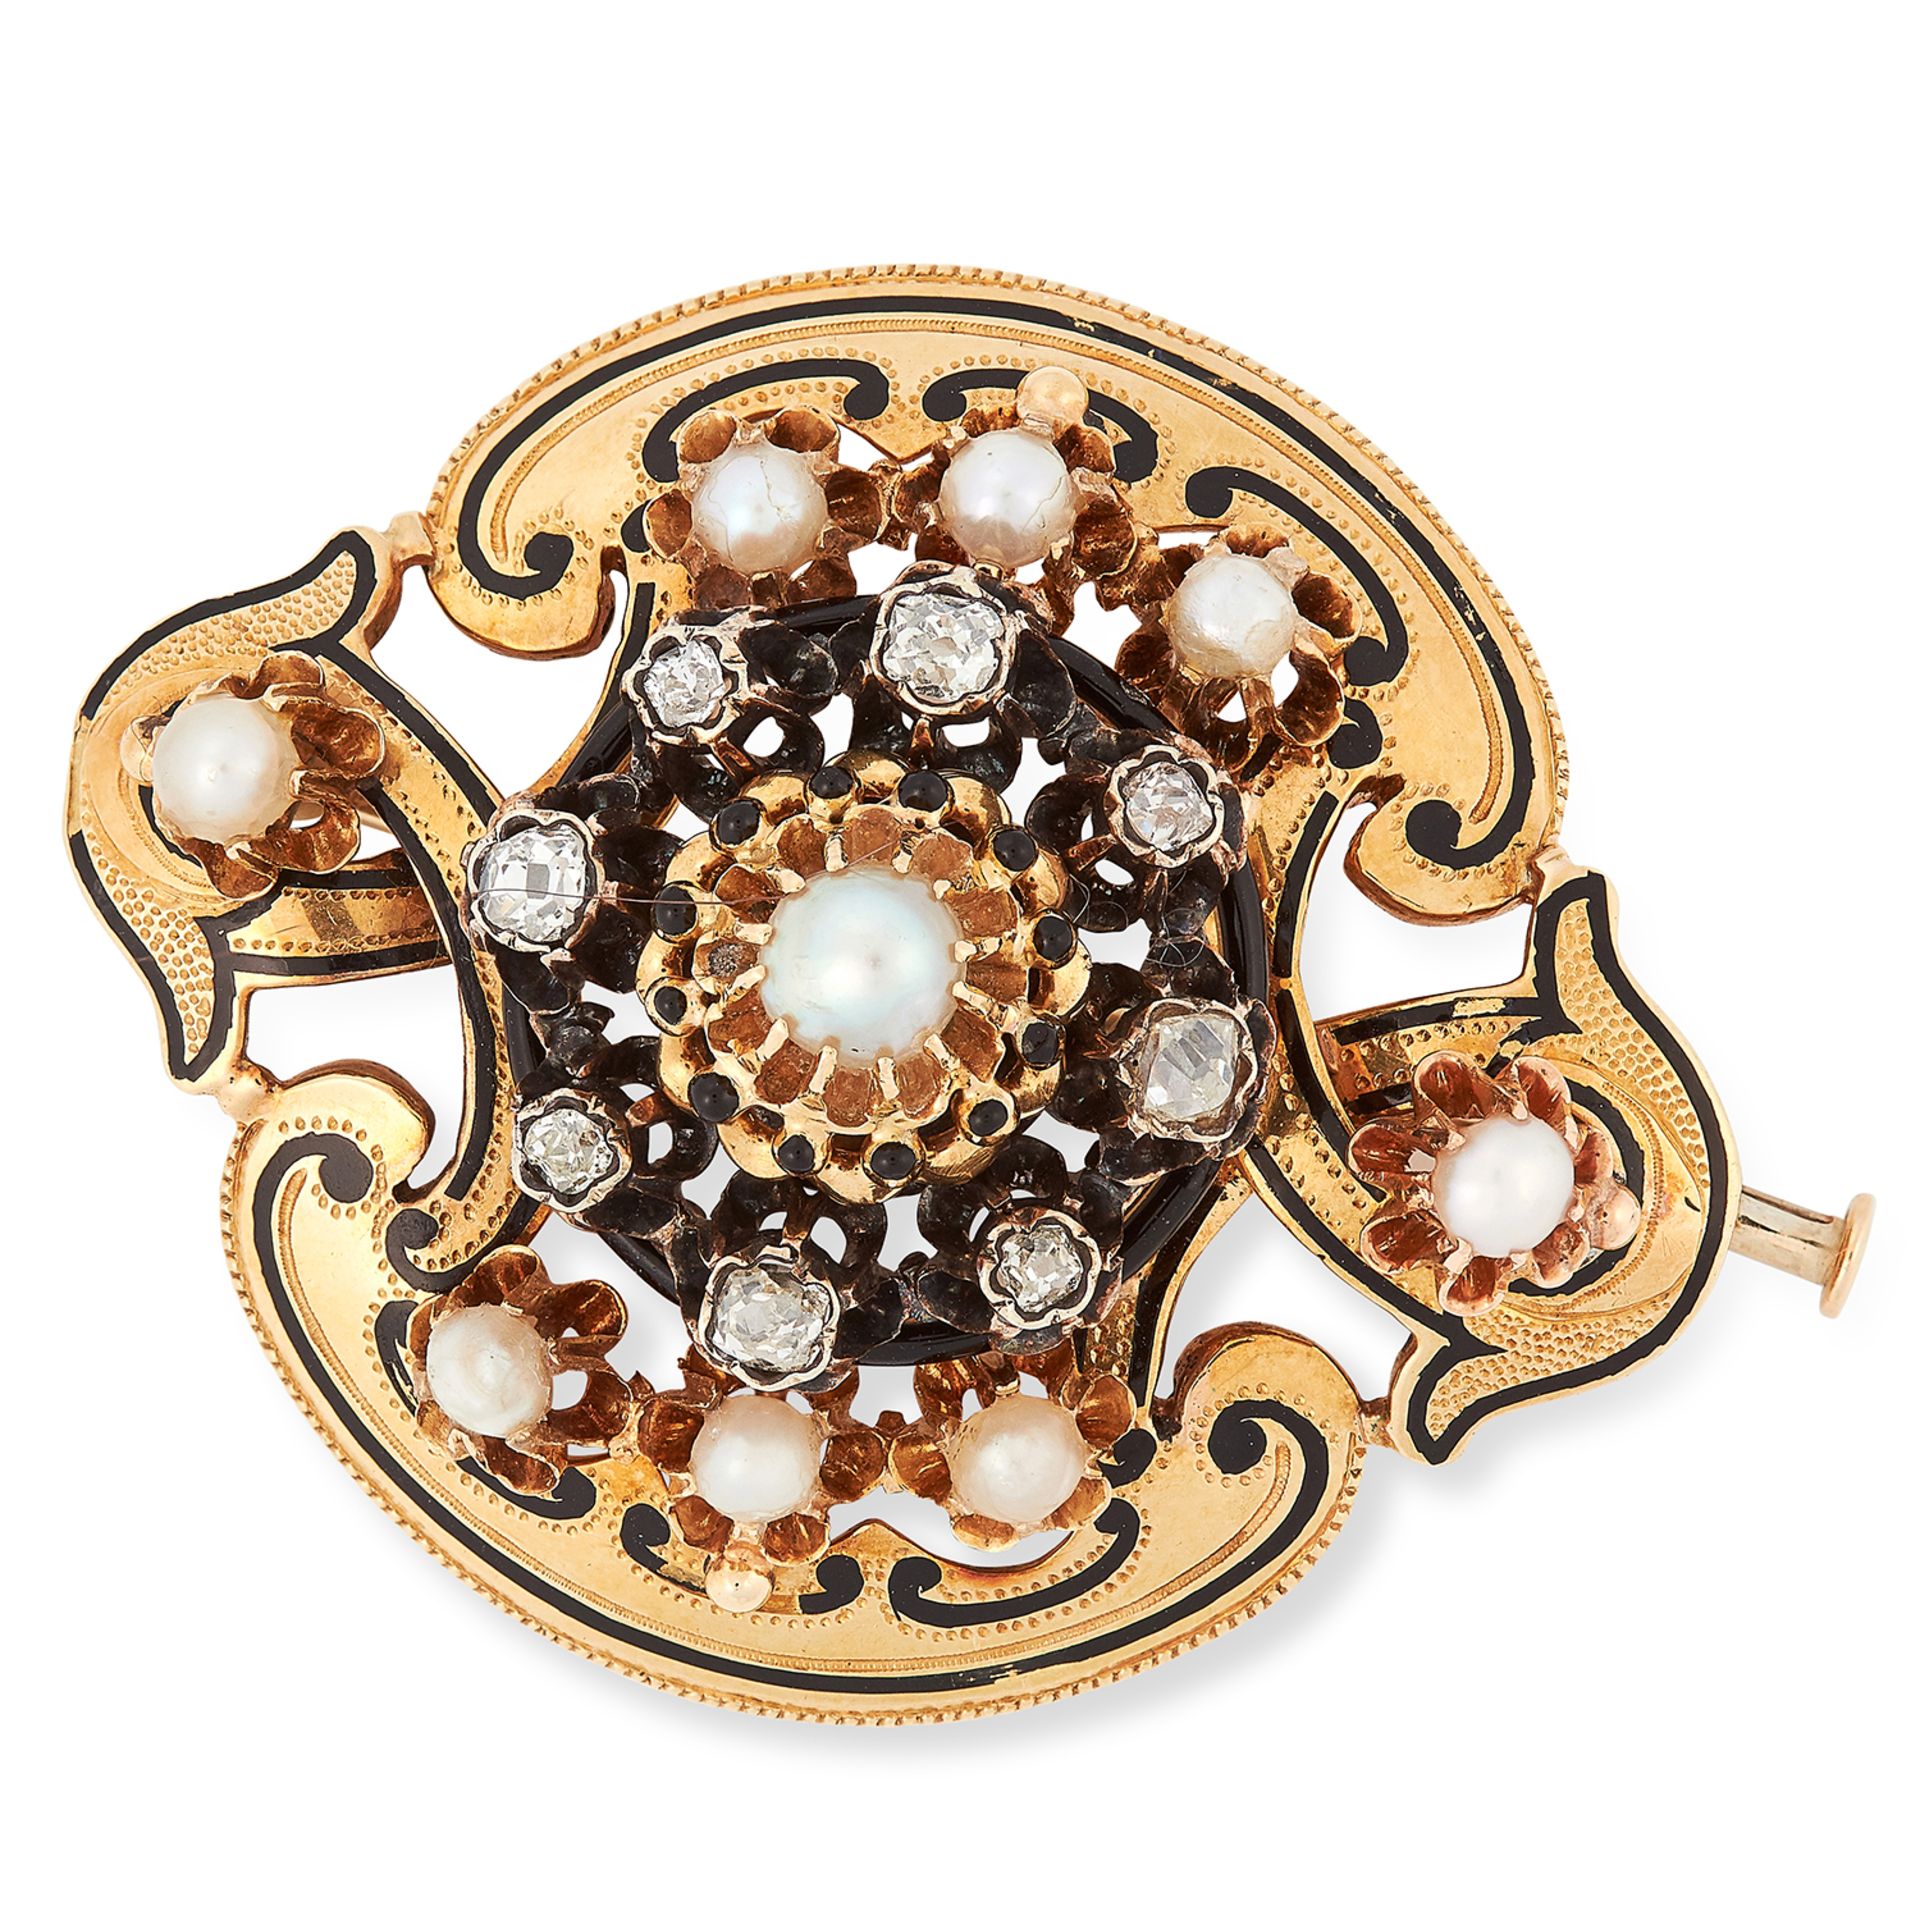 ANTIQUE VICTORIAN PEARL, DIAMOND AND ENAMEL BROOCH set with pearls, old cut diamonds and black